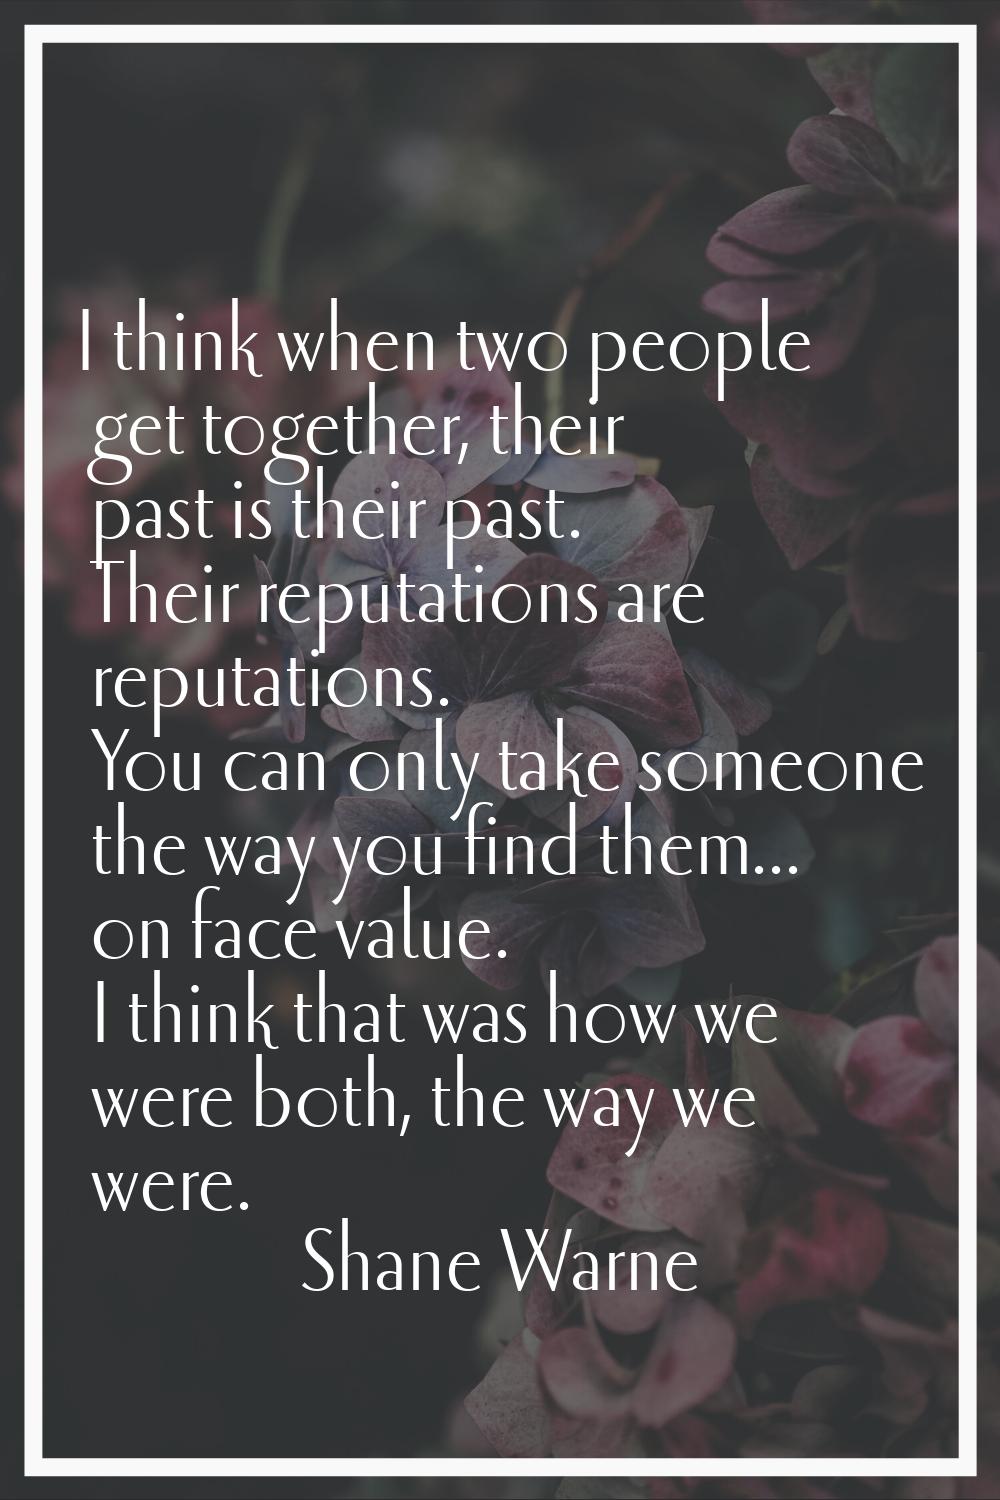 I think when two people get together, their past is their past. Their reputations are reputations. 